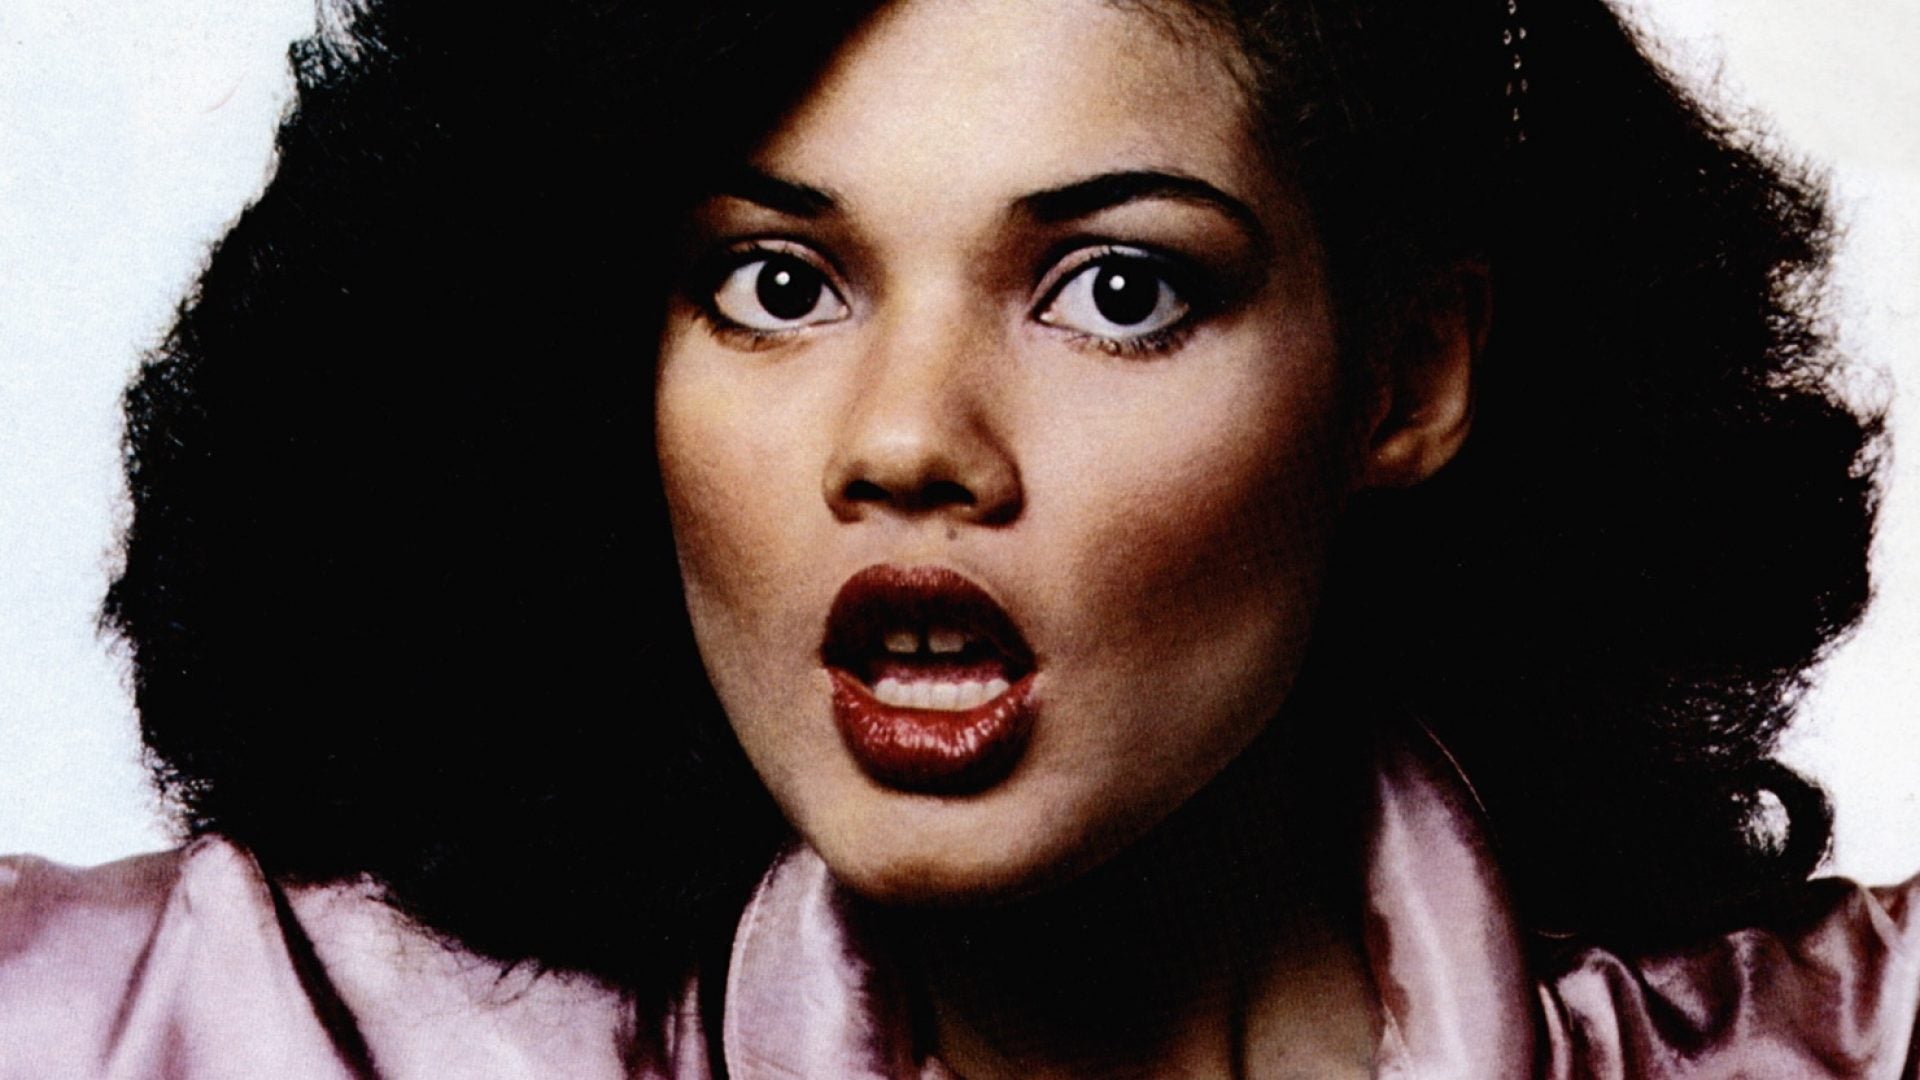 Angela Bofill On Creating Timeless Soul, Living Happily And Having Denzel As A Fan